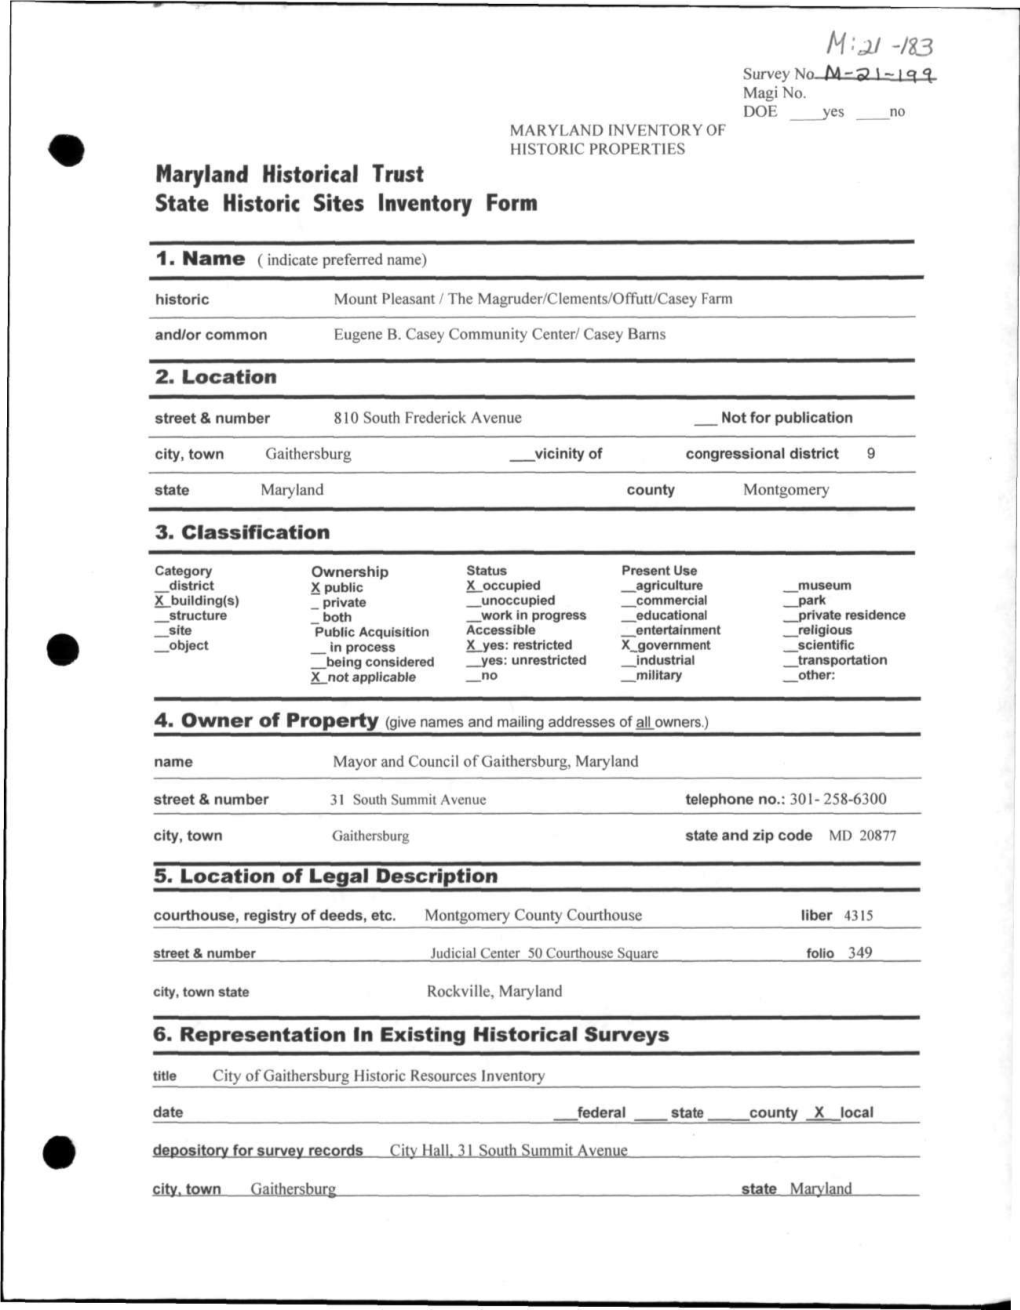 21-183 Maryland Historical Trust State Historic Sites Inventory Form